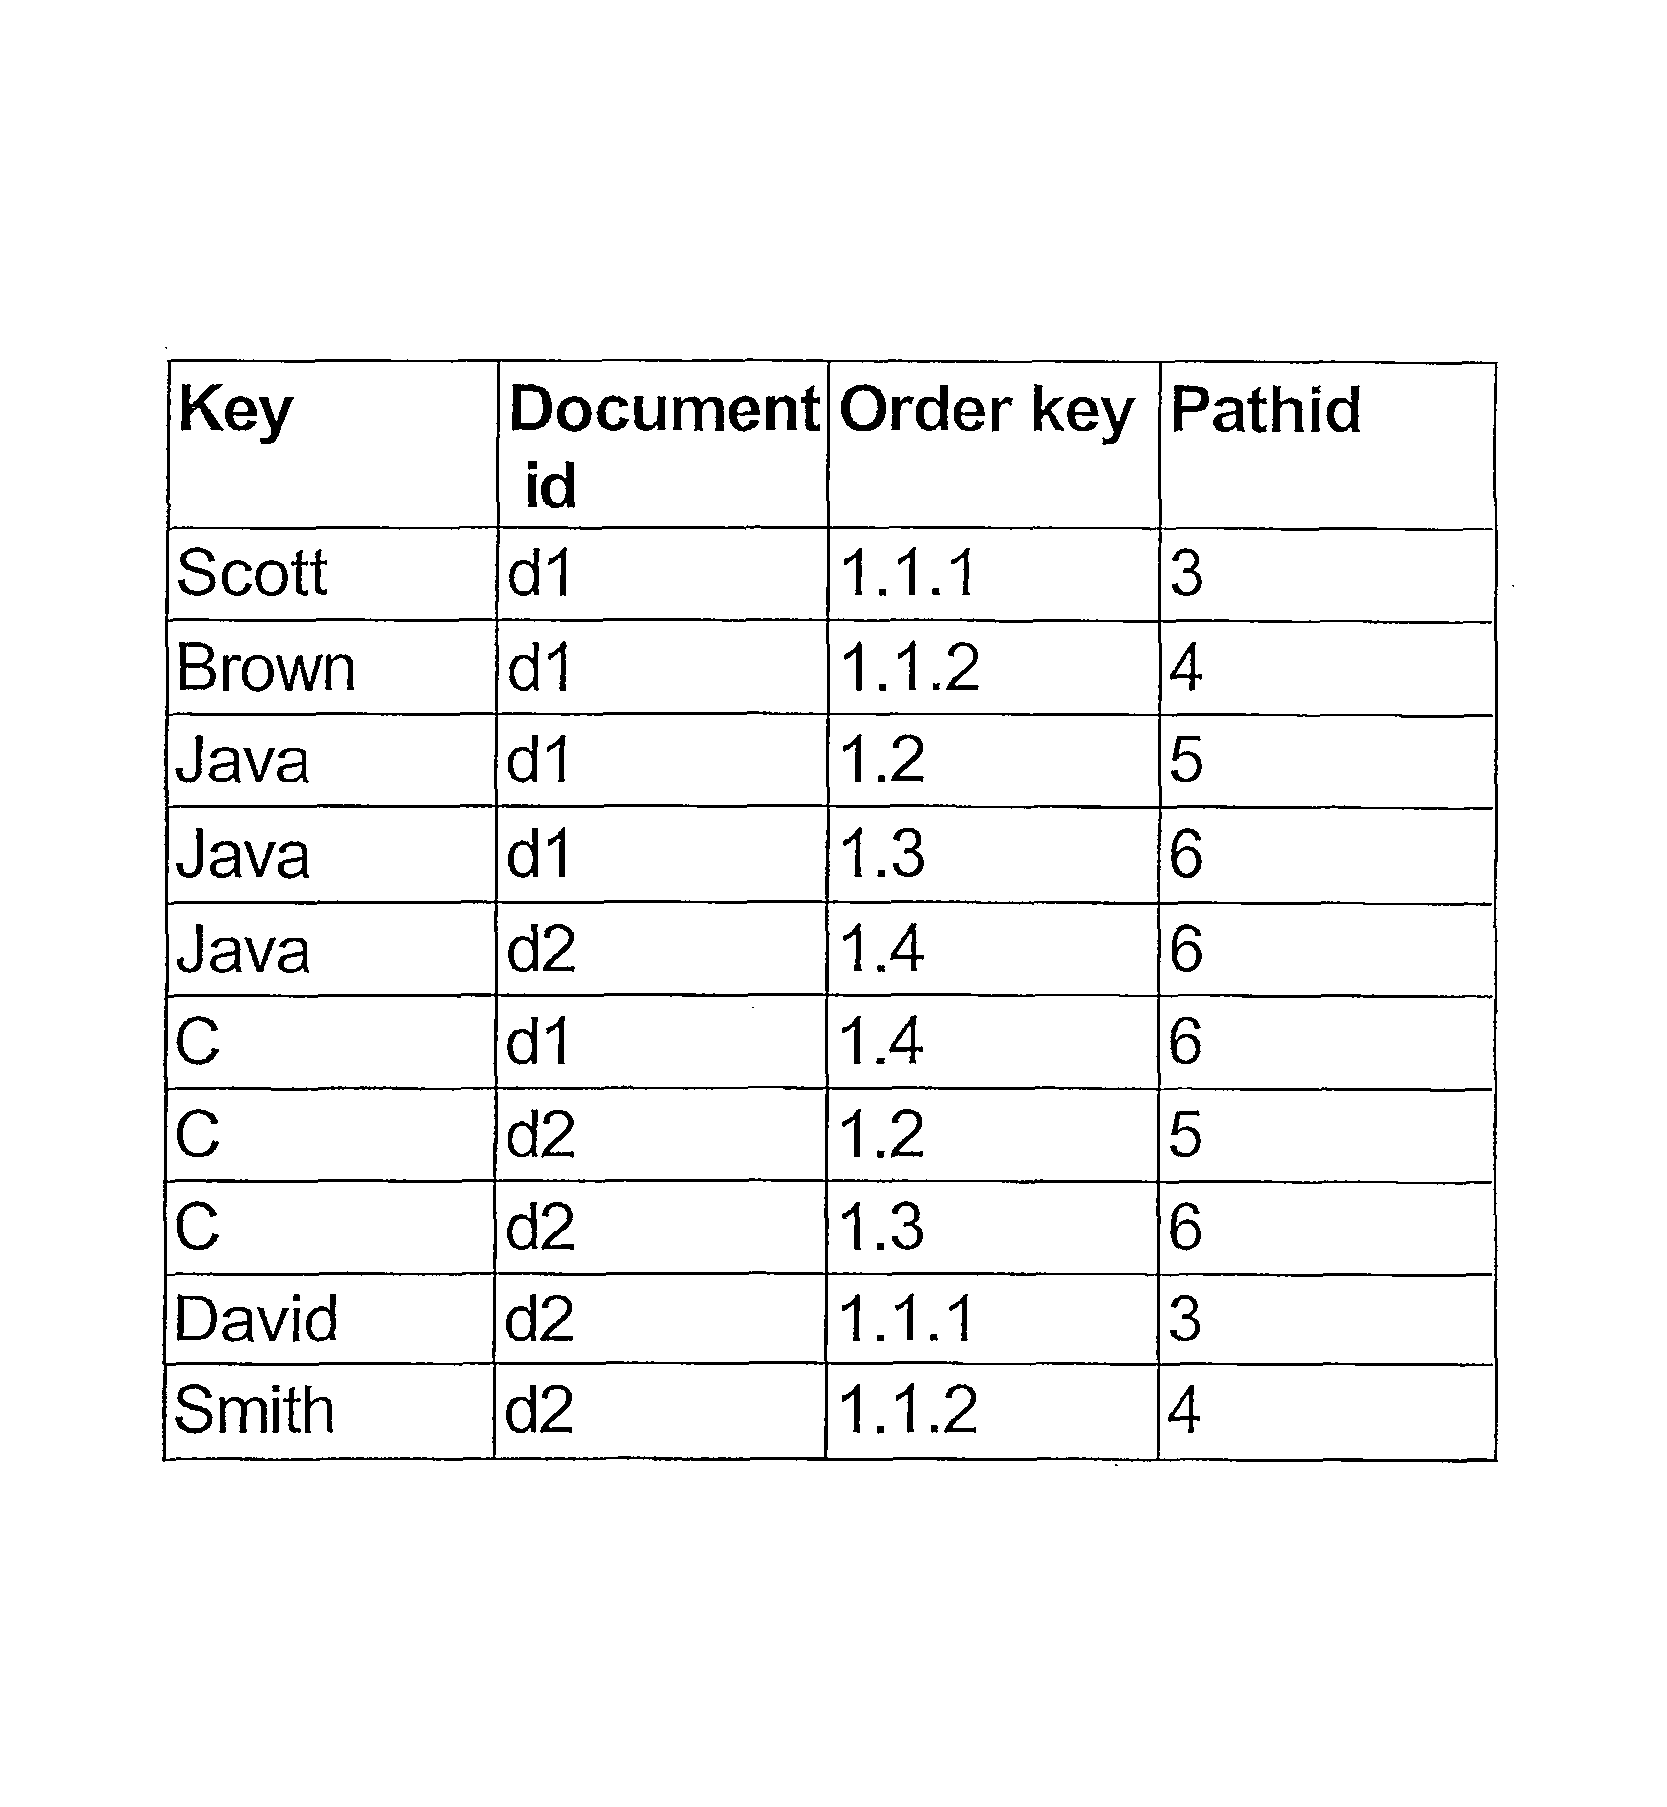 Mechanism for efficiently searching XML document collections